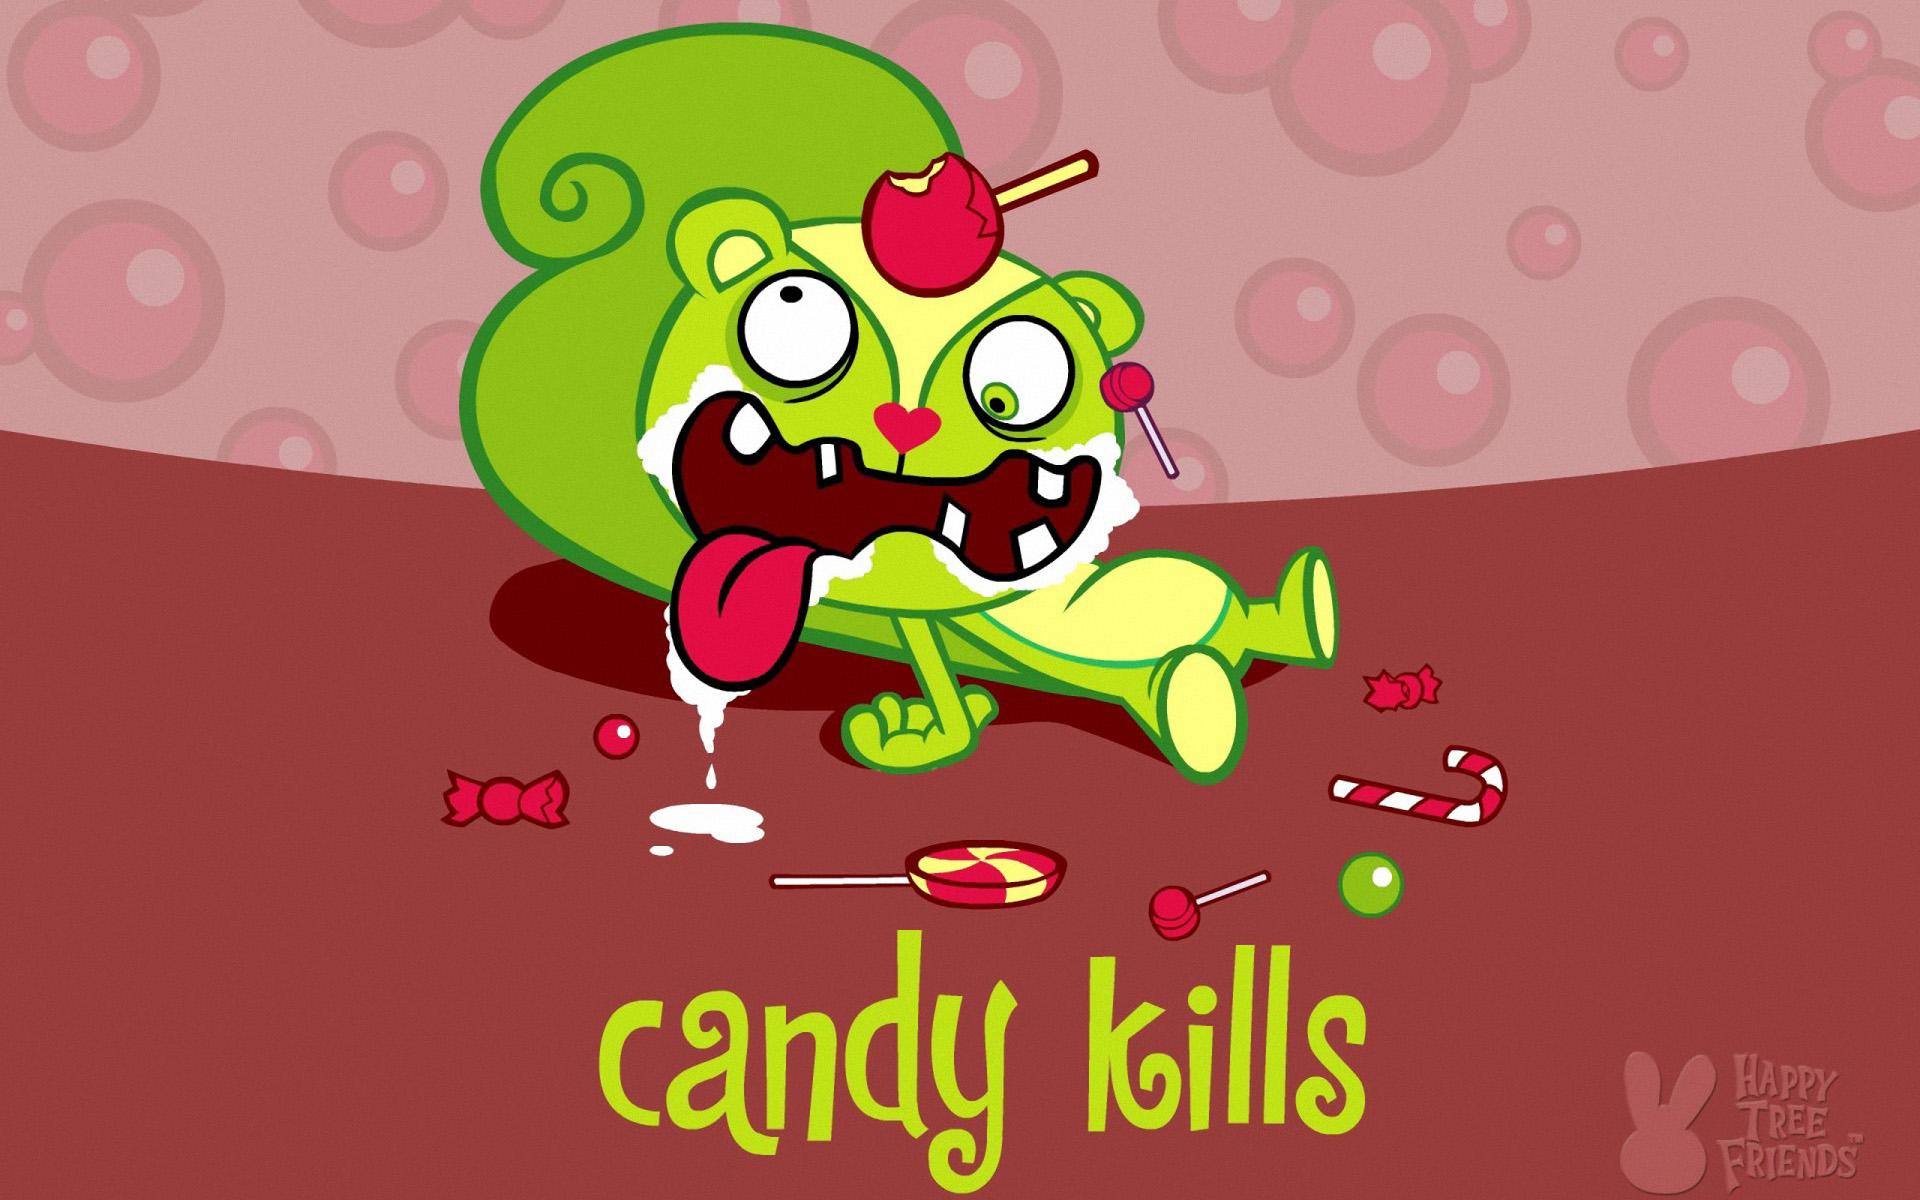 Happy tree friends pictures